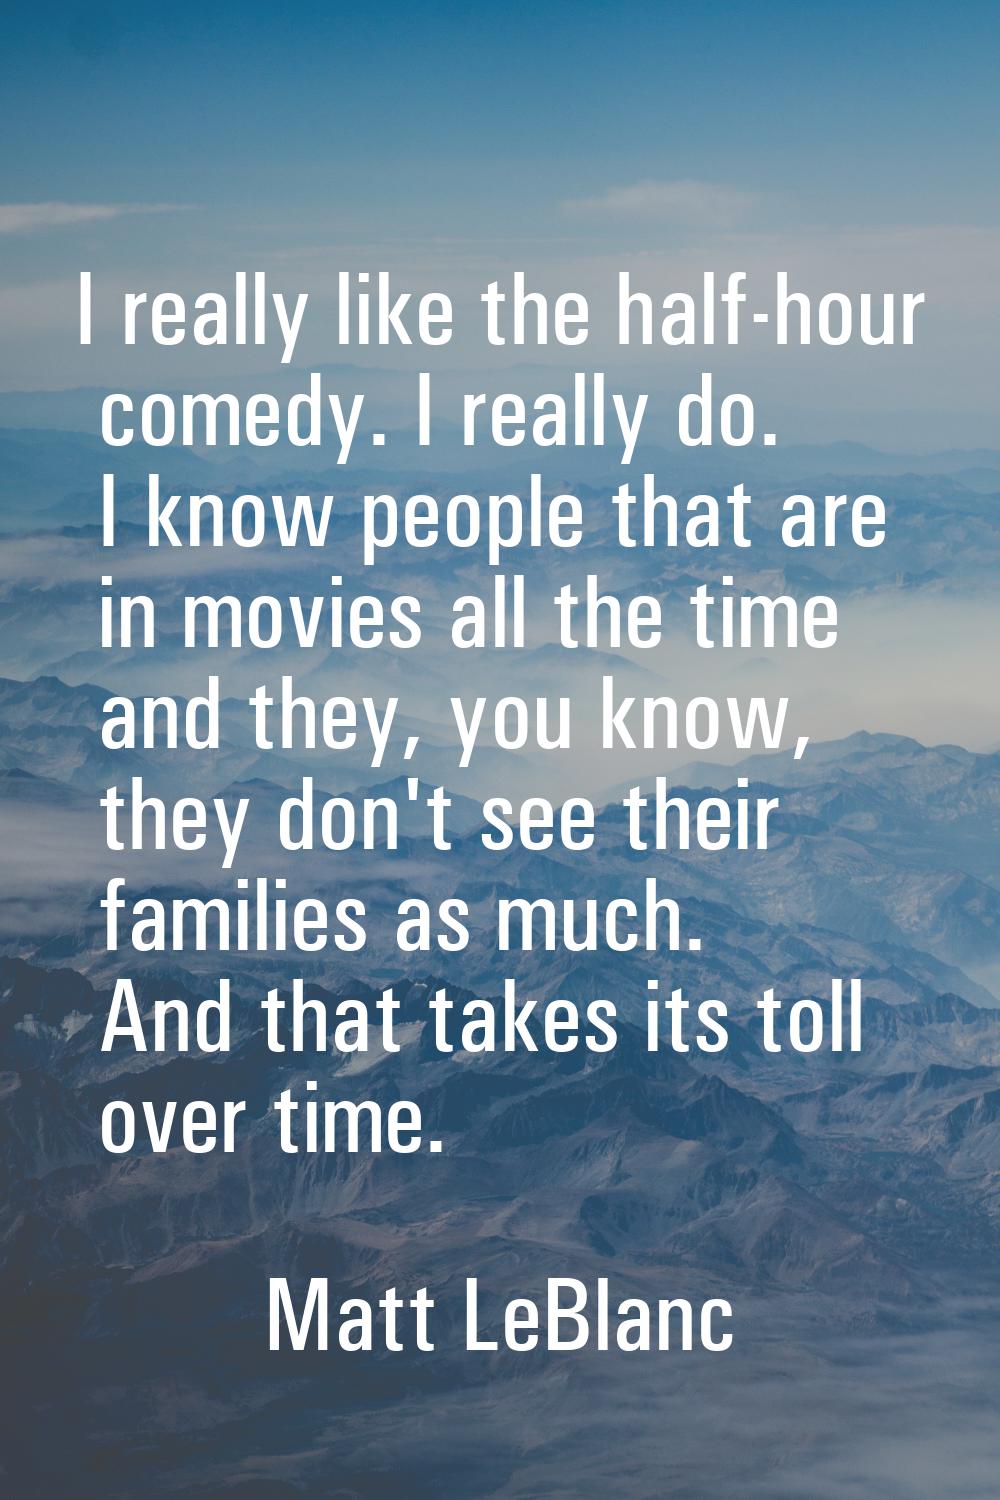 I really like the half-hour comedy. I really do. I know people that are in movies all the time and 